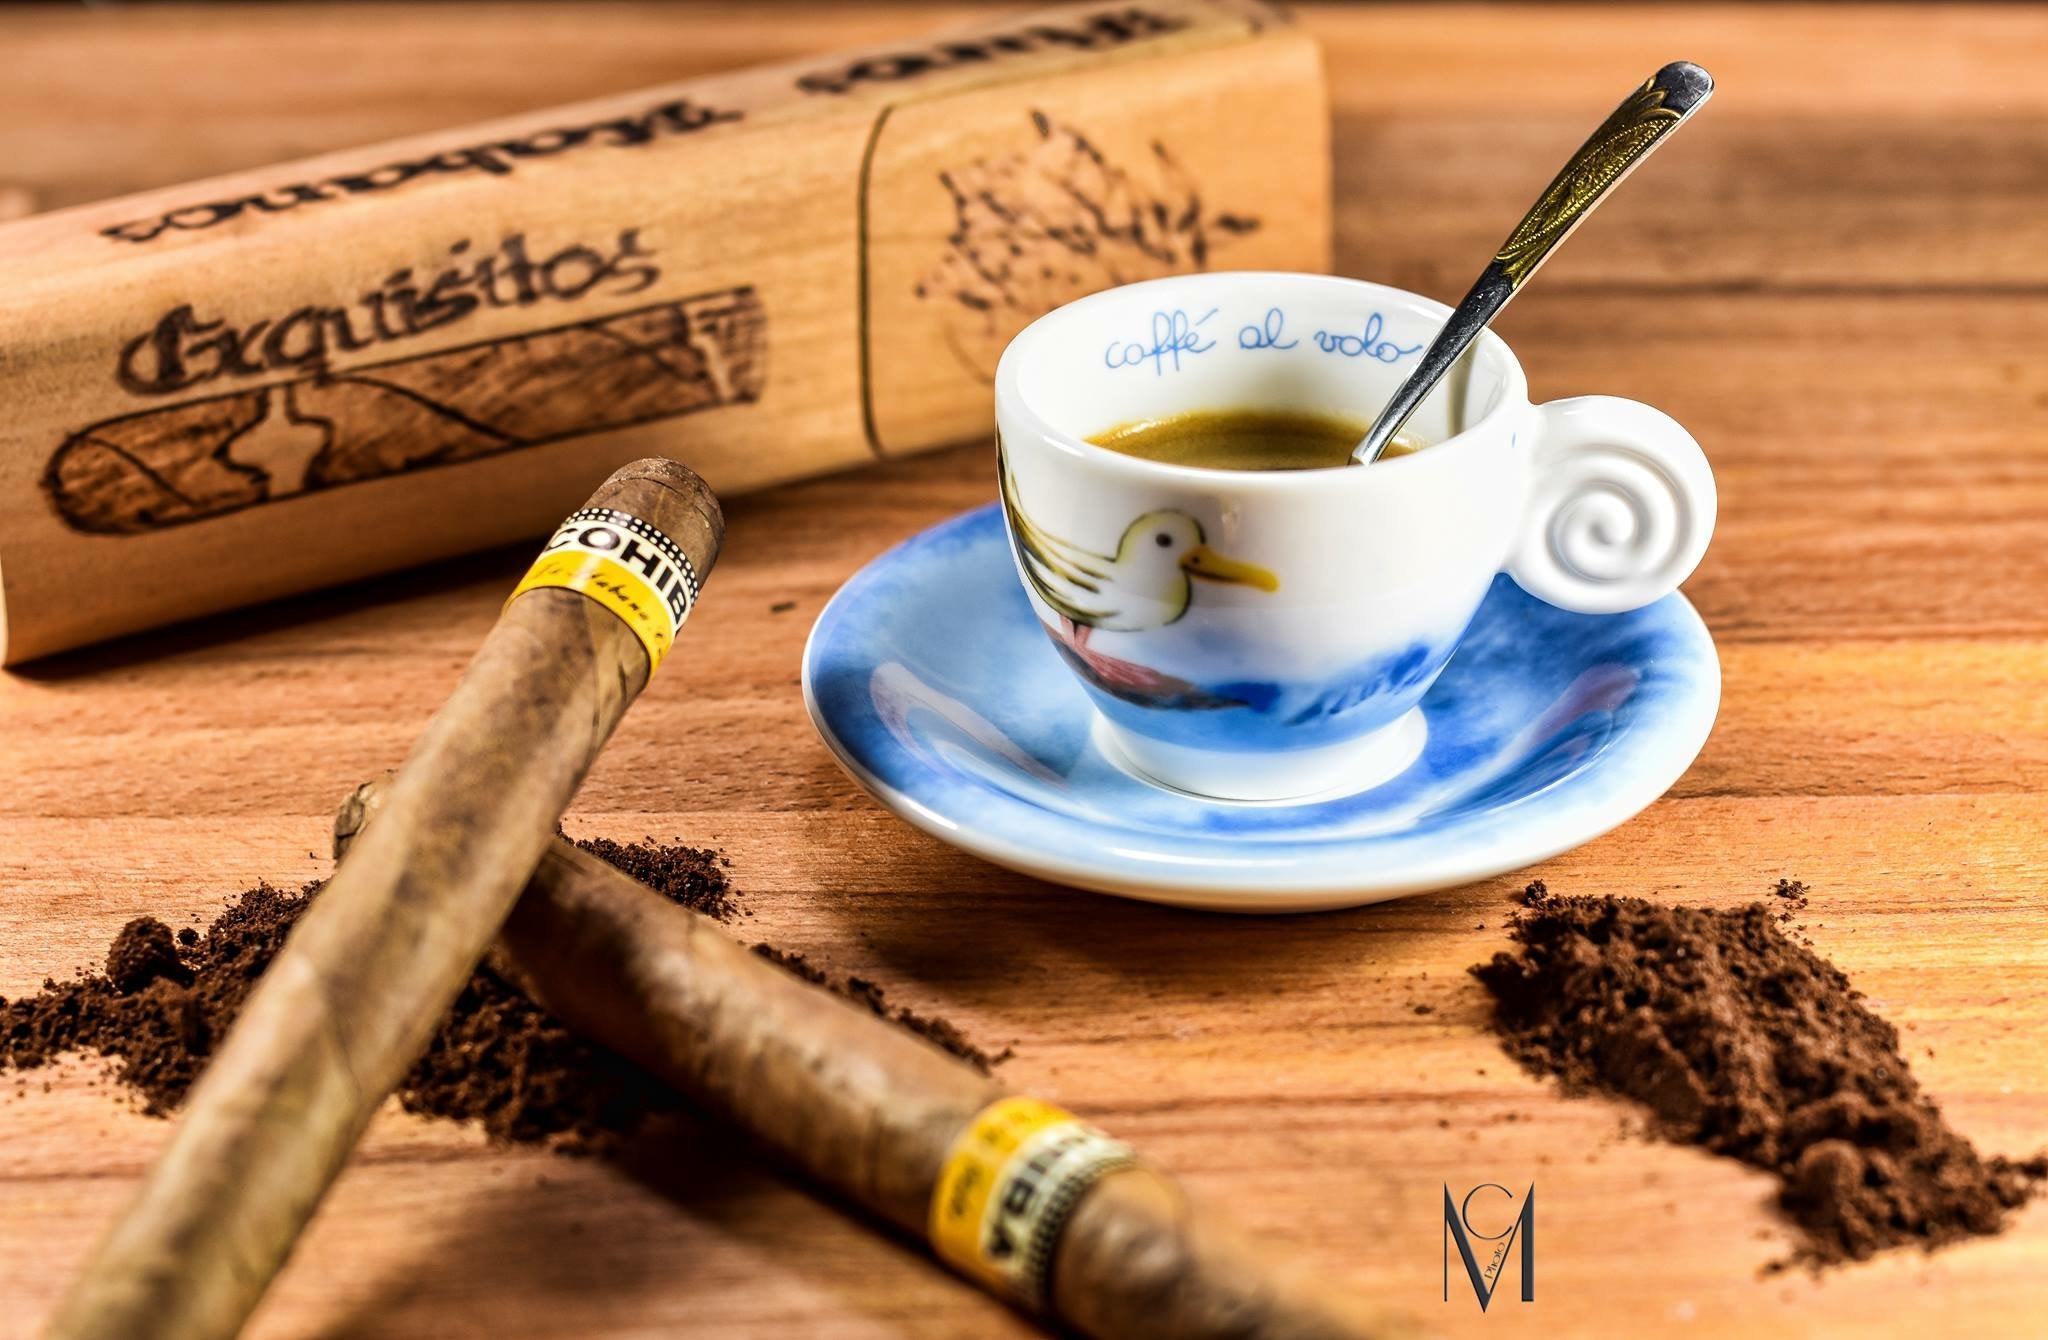 General 2048x1340 still life cup cigars coffee spoon Massimo Cola closeup drink